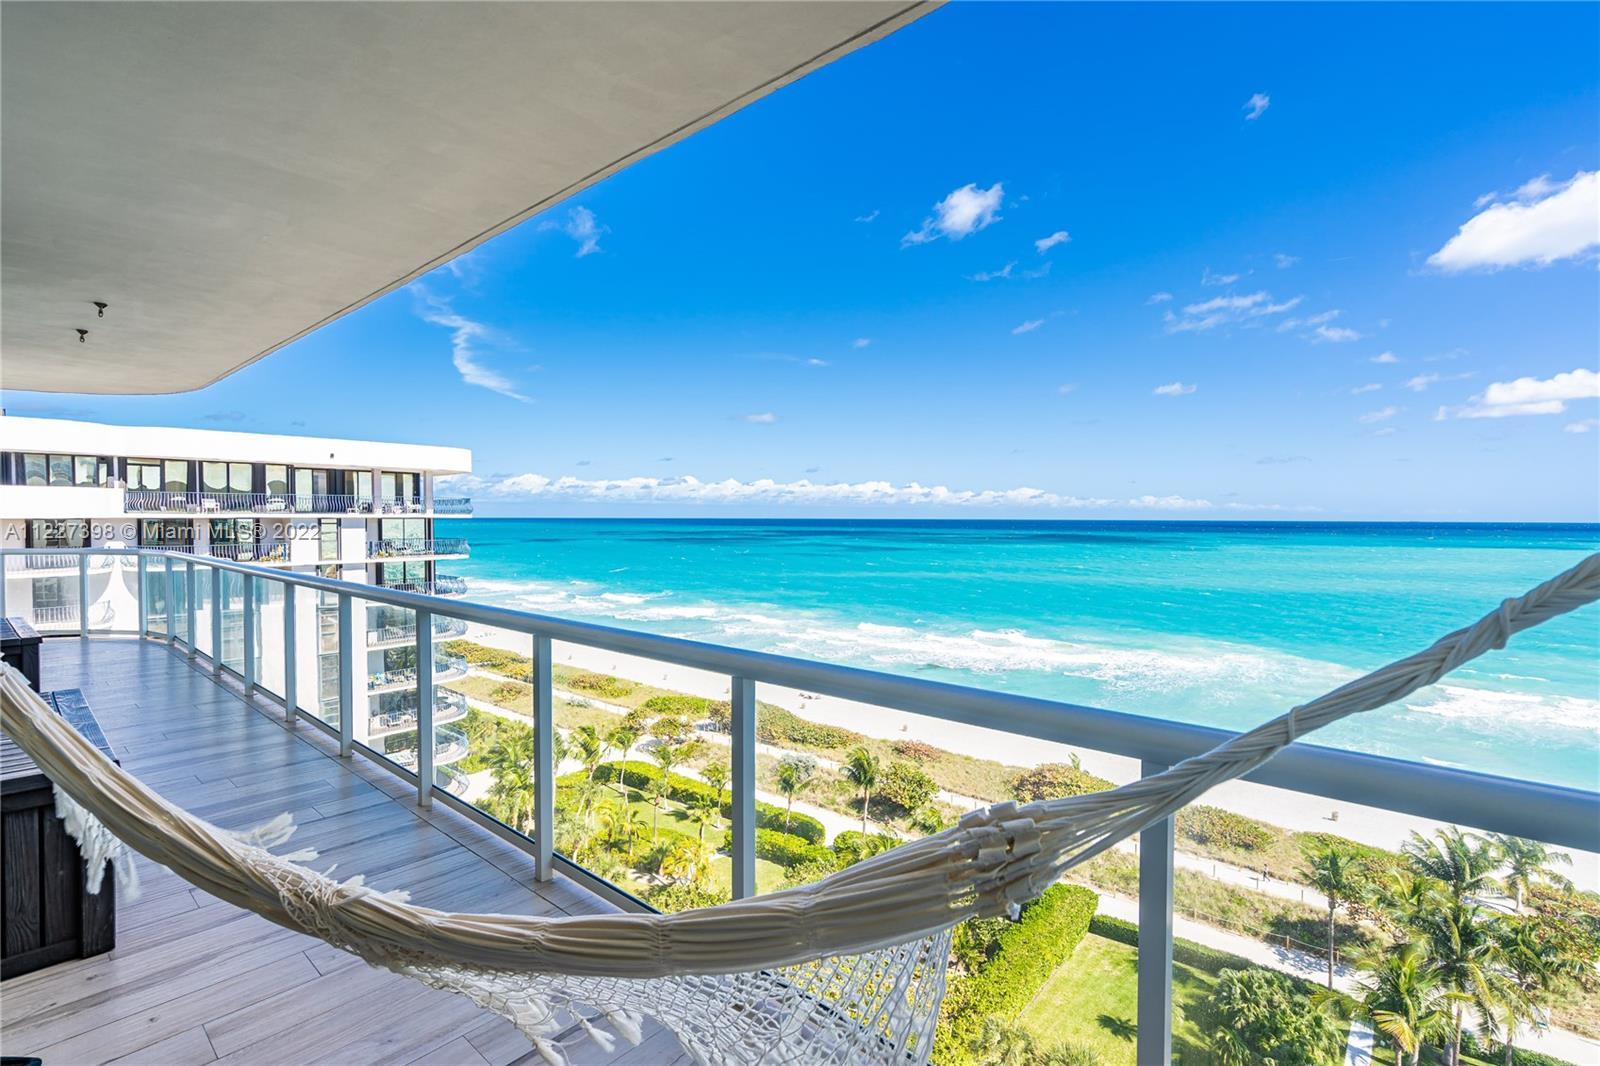 Unparalleled and breathtaking views to the beach and ocean from this gorgeous 2 Bedrooms, 2 Baths un